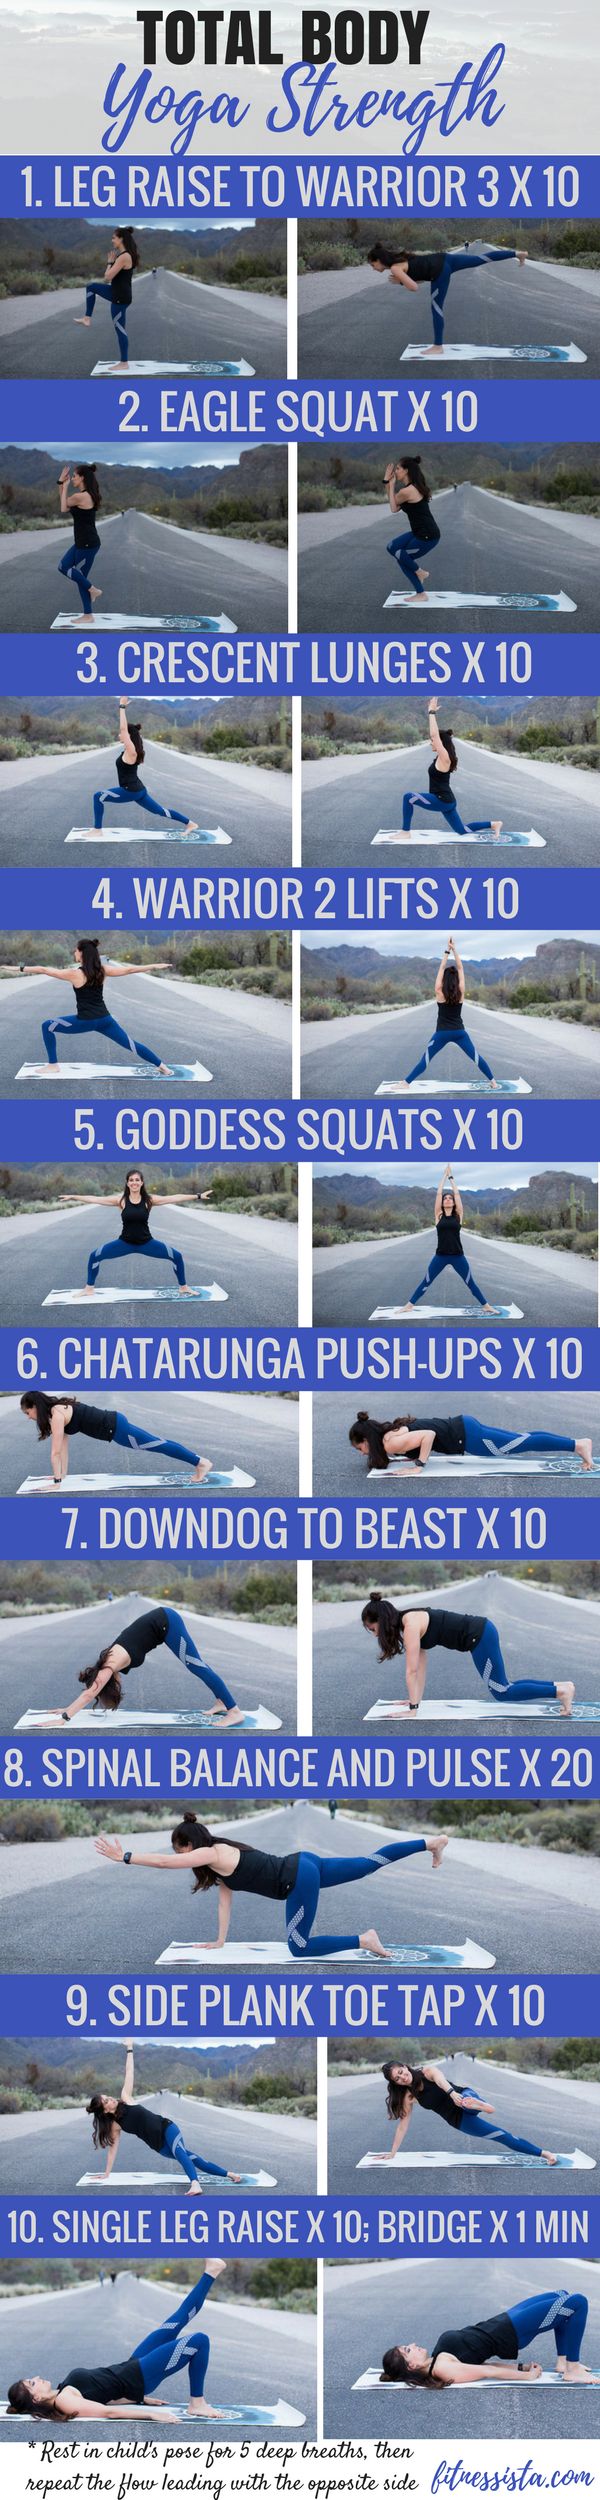 Total body yoga strength: A bodyweight workout you can do at home to improve str...